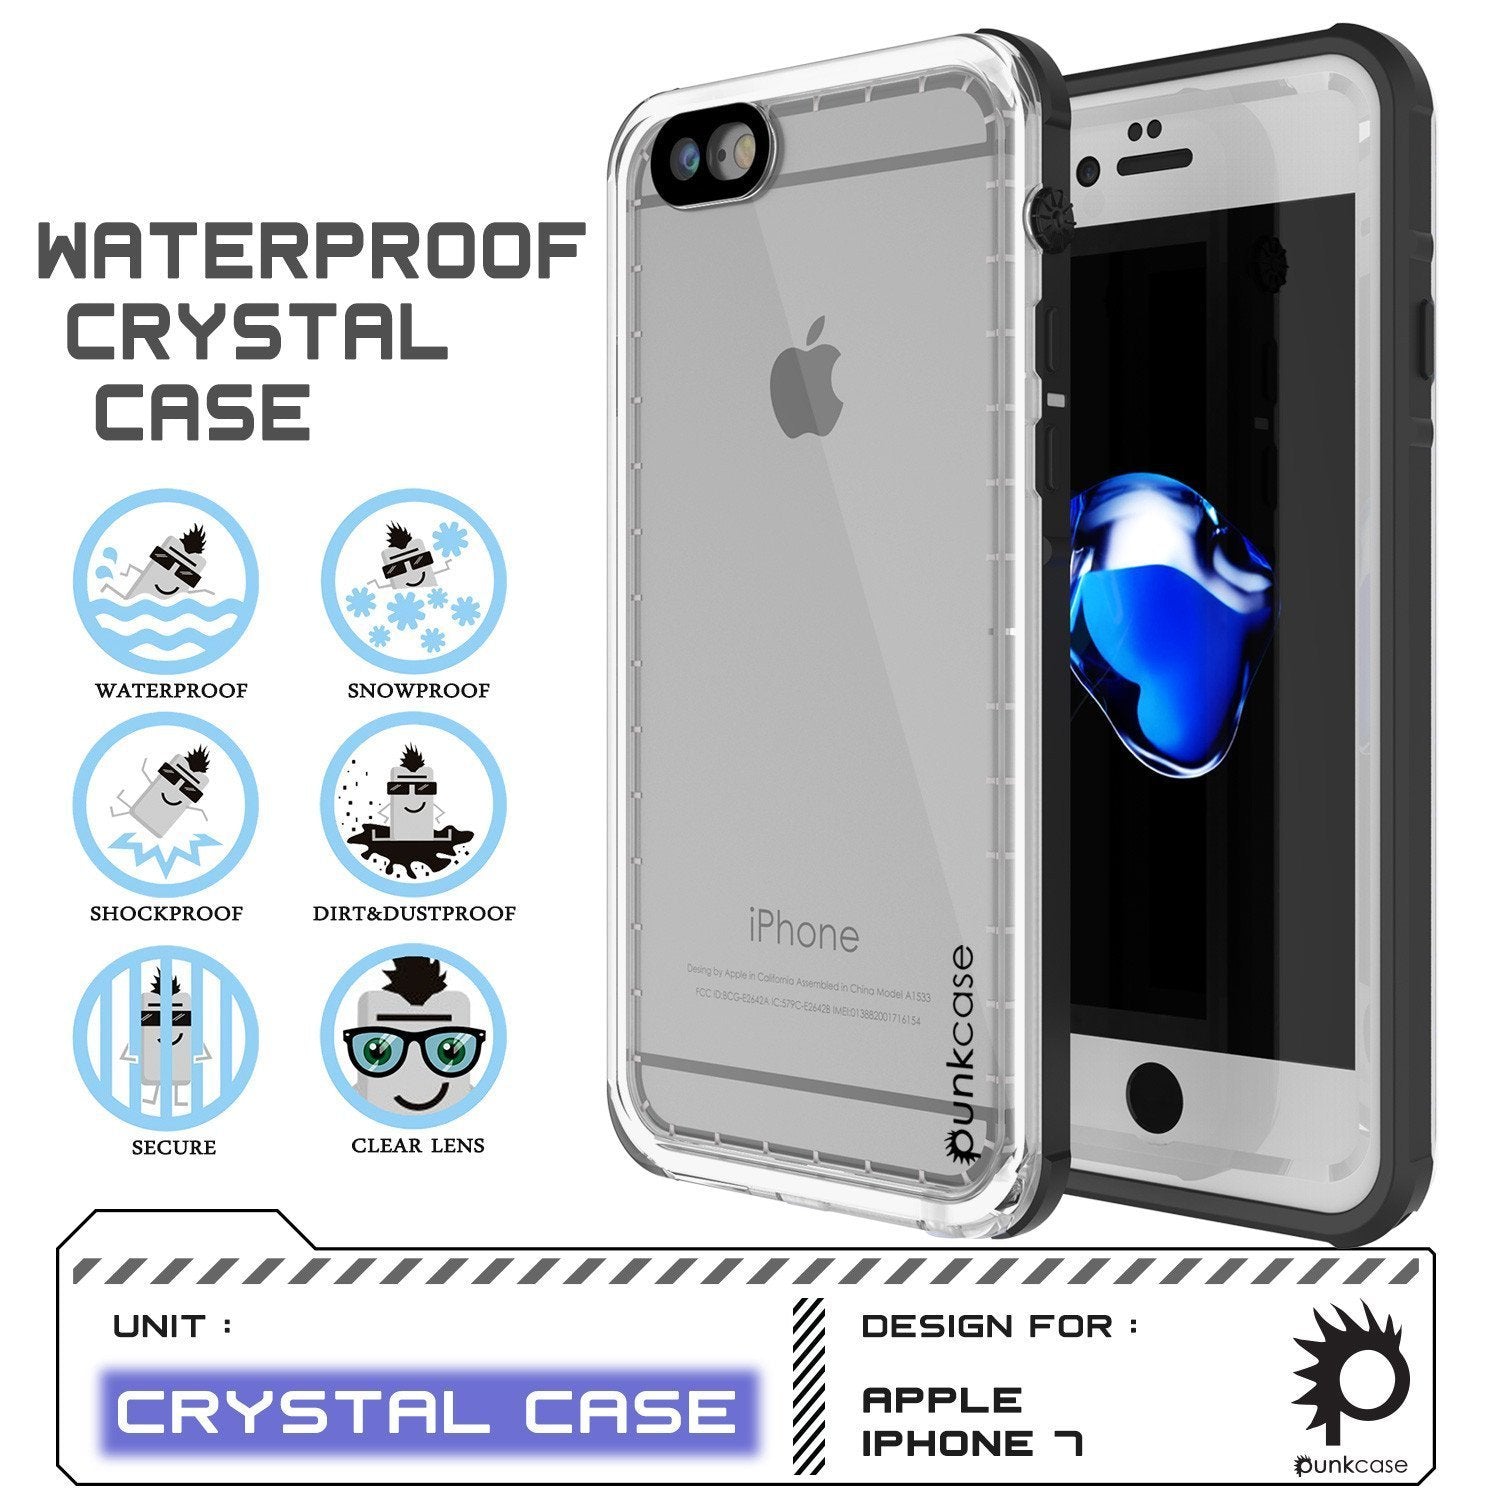 Apple iPhone SE (4.7") Waterproof Case, PUNKcase CRYSTAL White W/ Attached Screen Protector  | Warranty